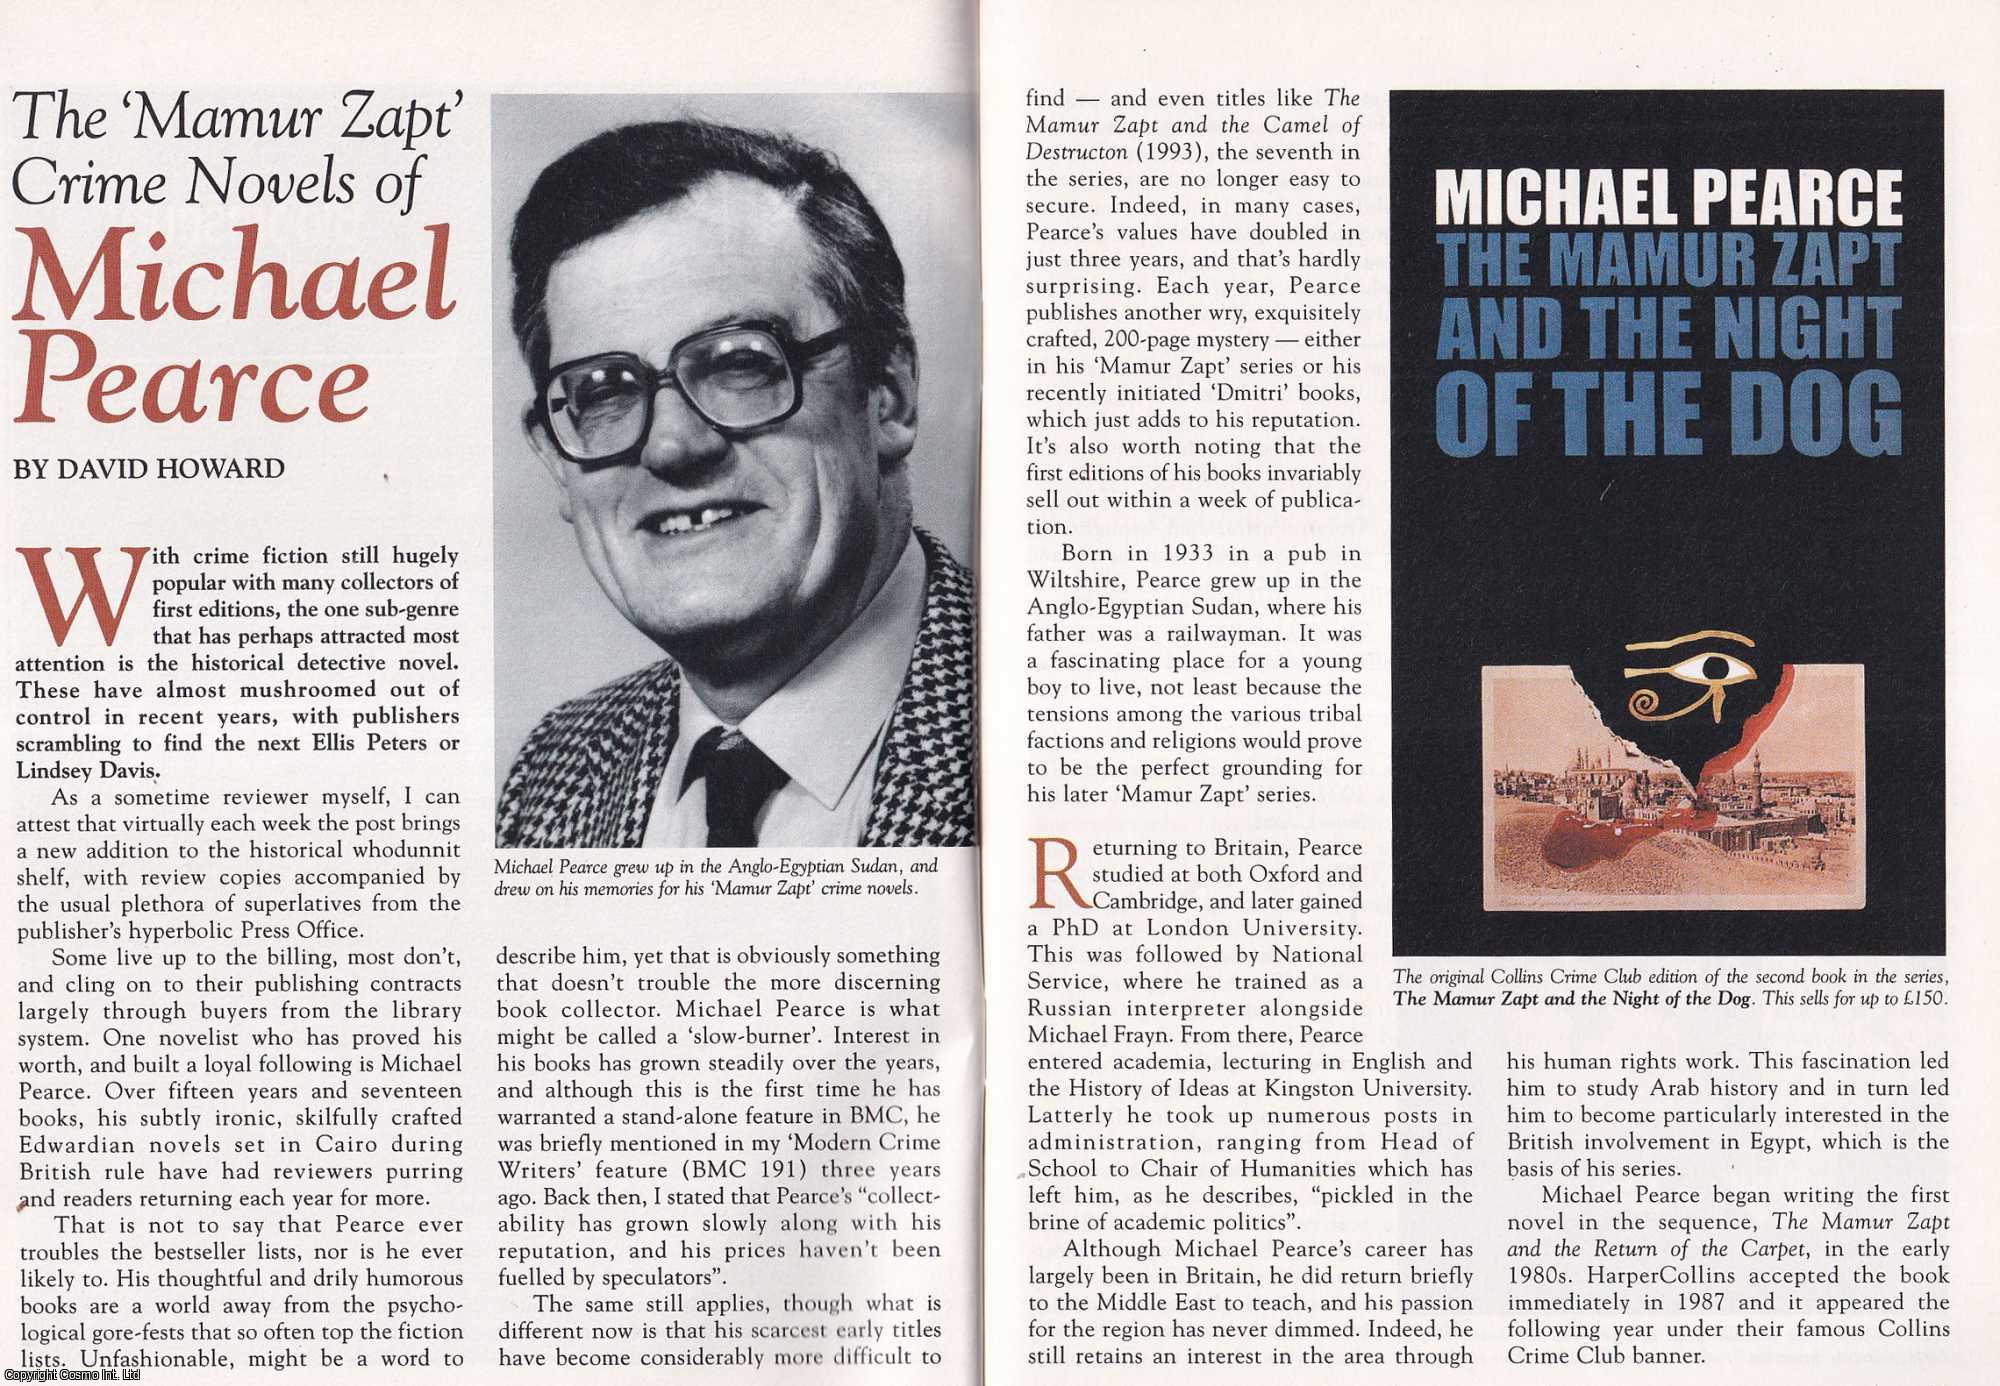 David Howard - The Mamur Zapt Crime Novels of Michael Pearce. This is an original article separated from an issue of The Book & Magazine Collector publication, 2003.